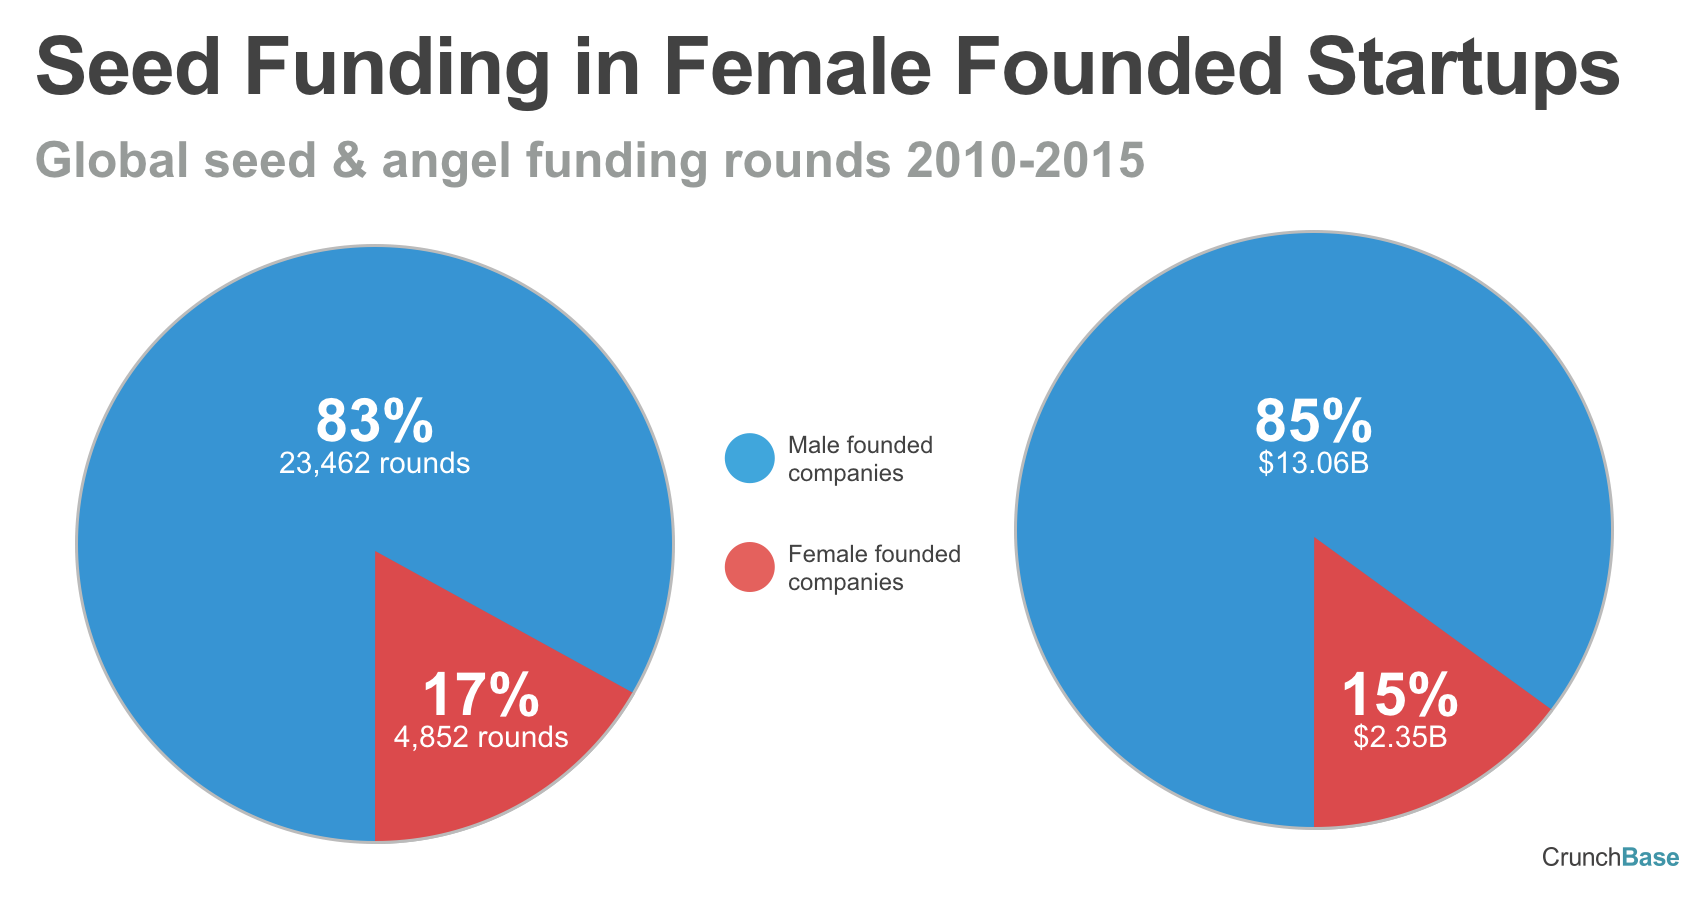 Seed Funding Rounds in Female Founded Startups